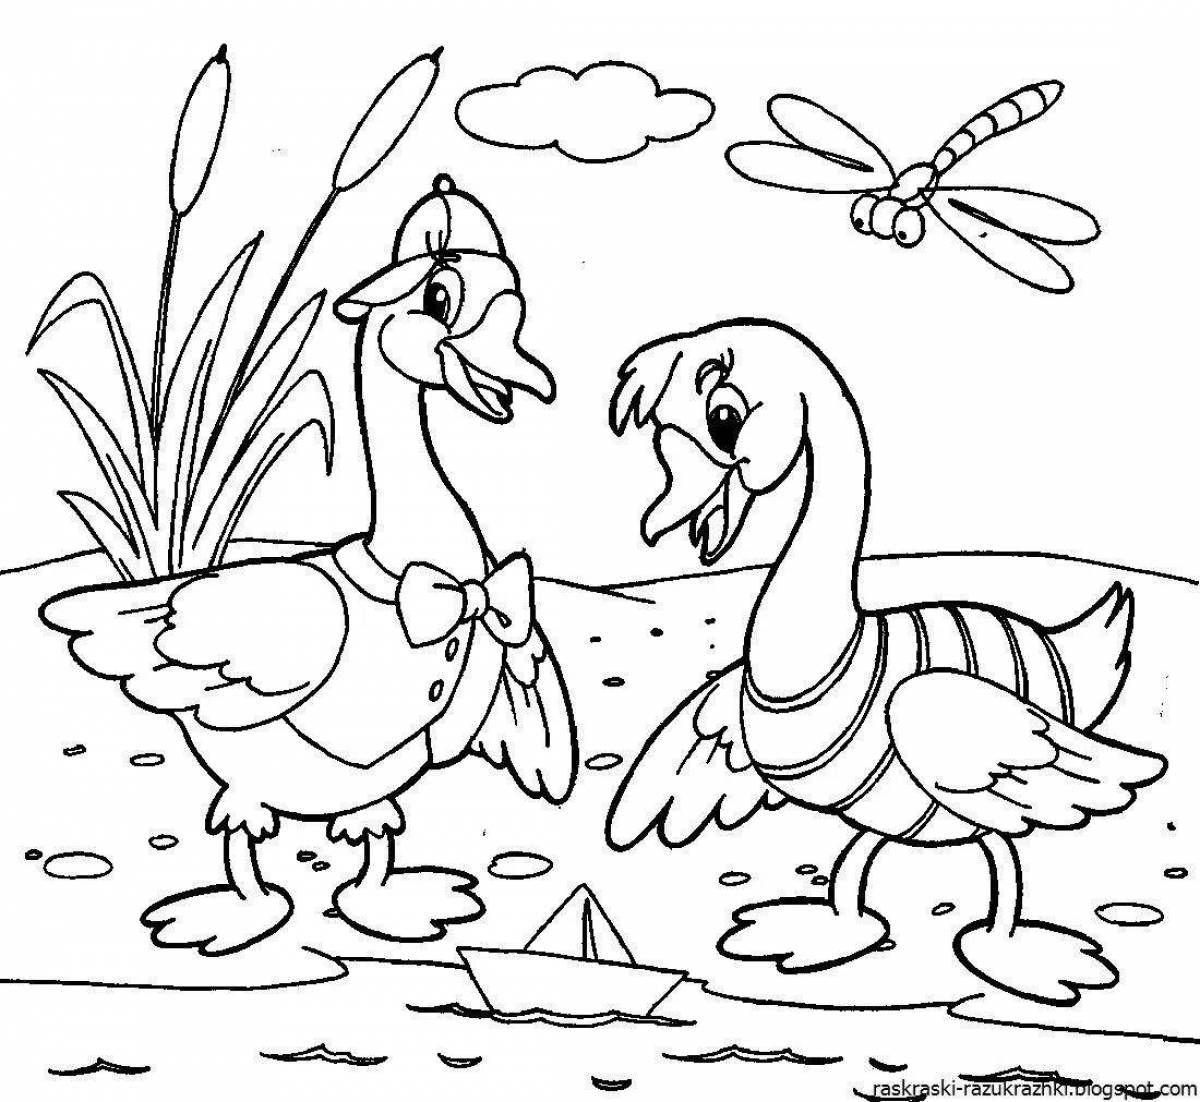 Awesome goose coloring page for 3-4 year olds